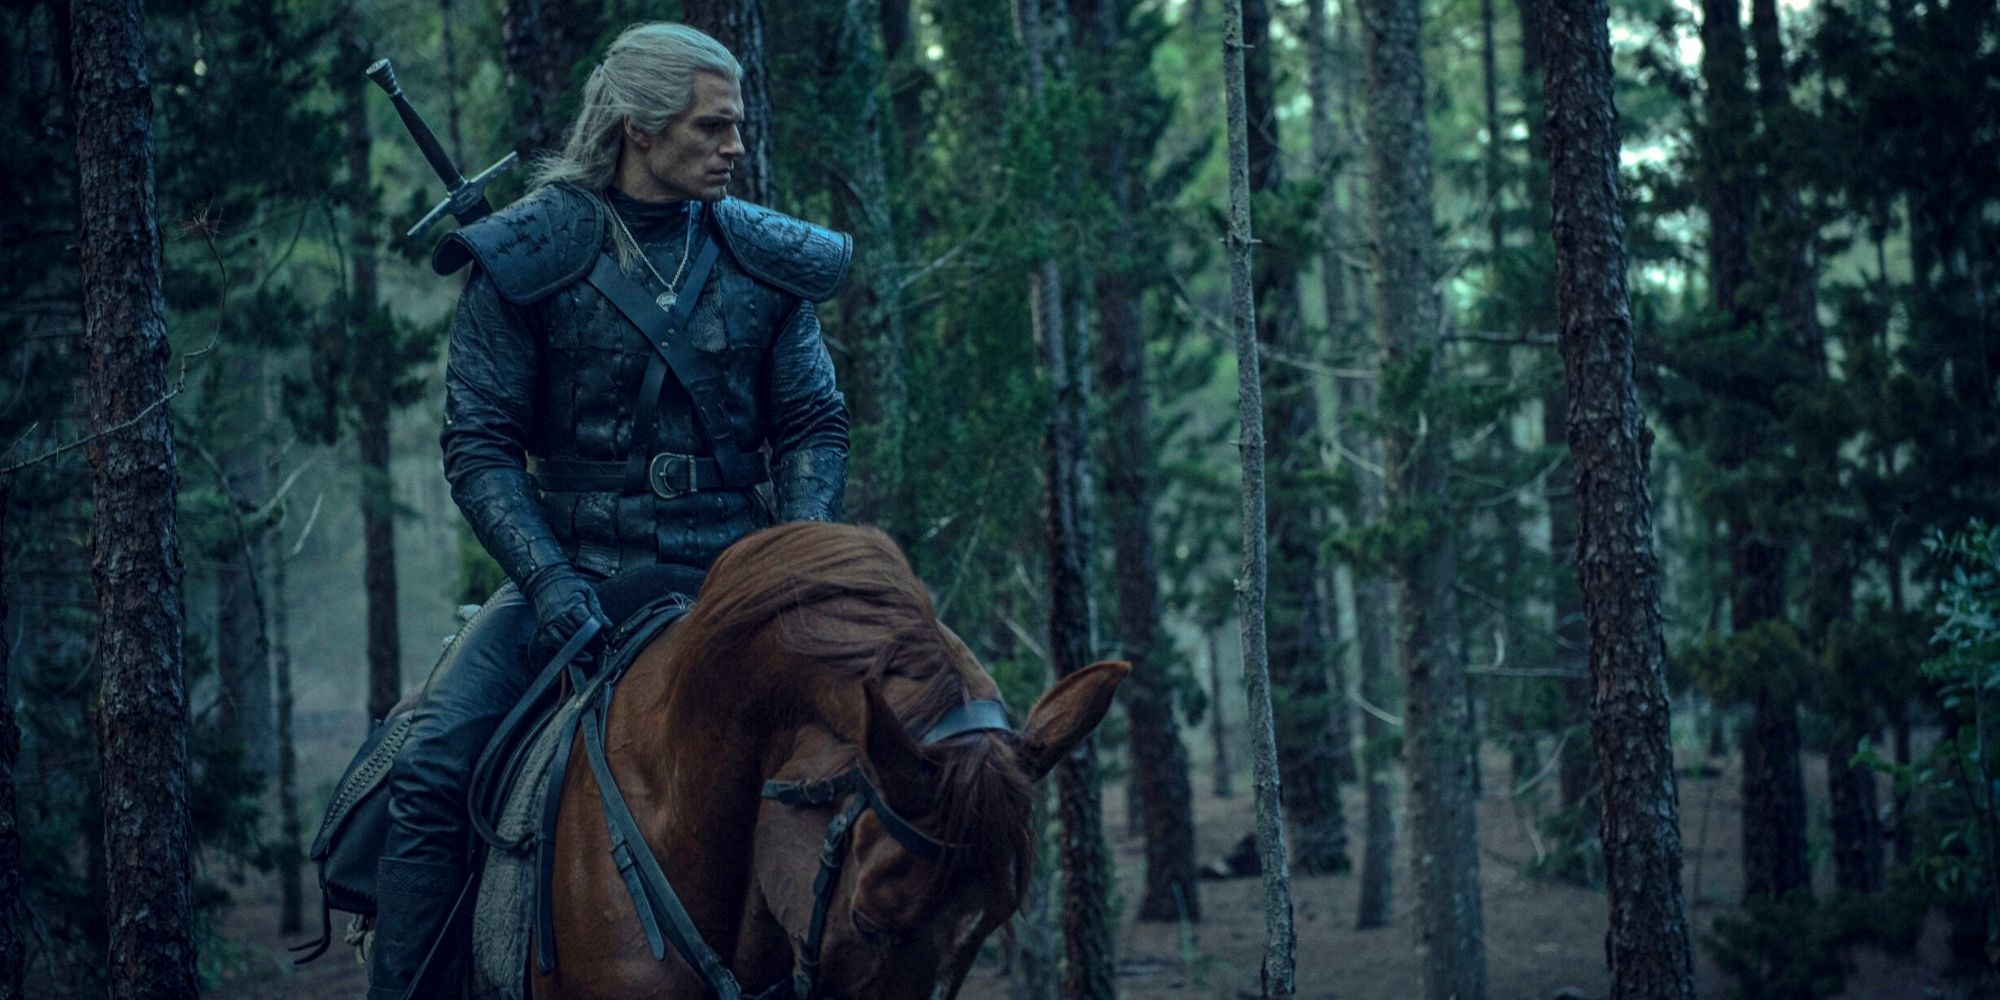 Geralt on a horse in The Witcher